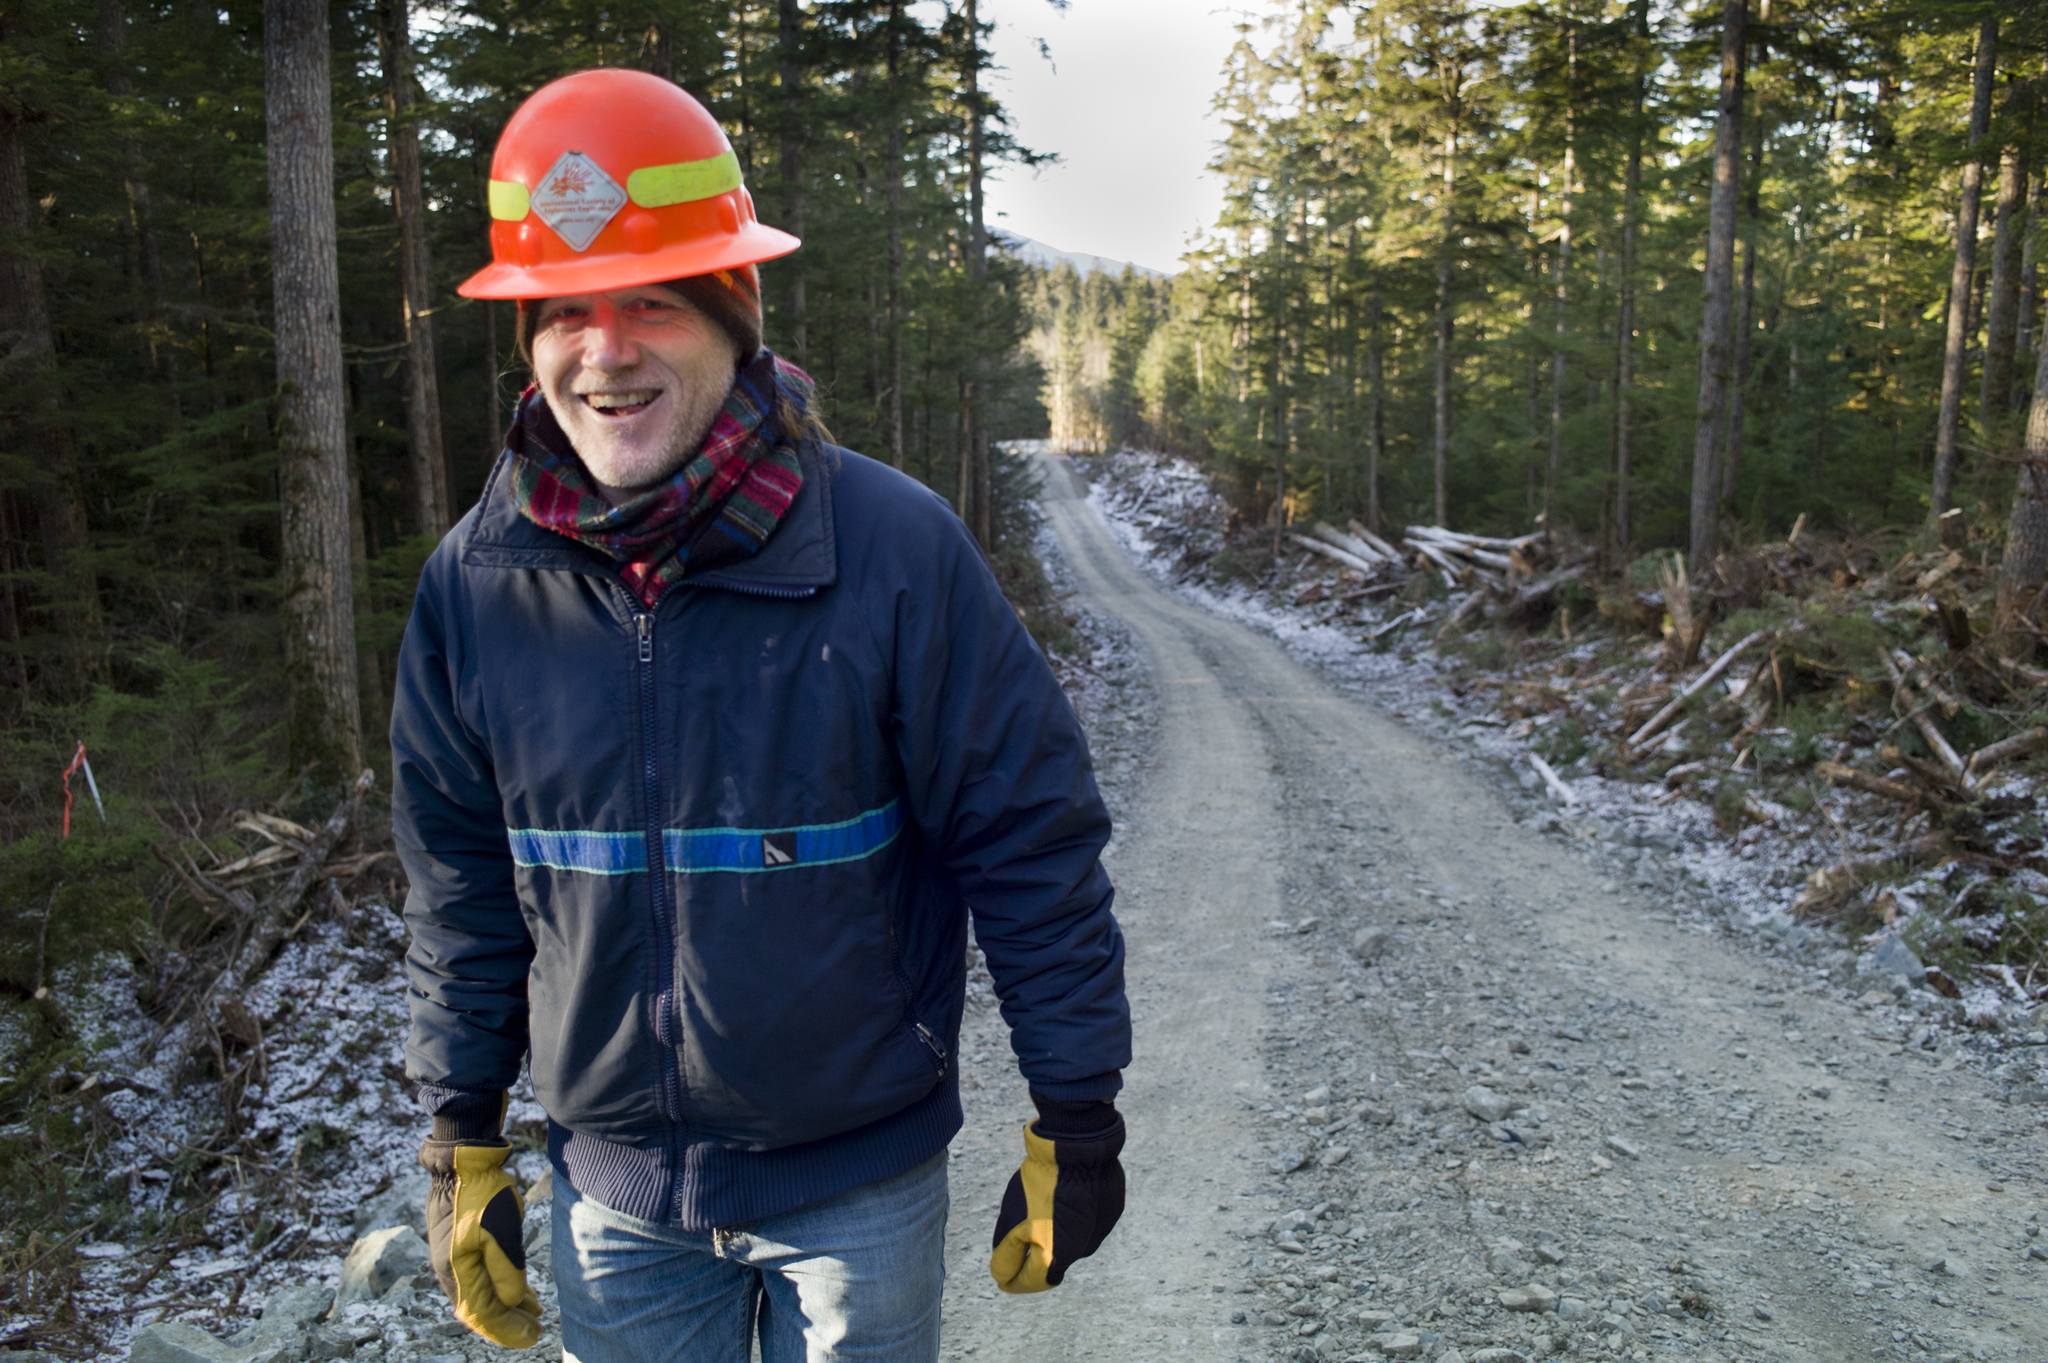 Alan Steffert, project manager for the city, gives a tour of the West Douglas Pioneer Road on Friday. (Michael Penn | Juneau Empire)